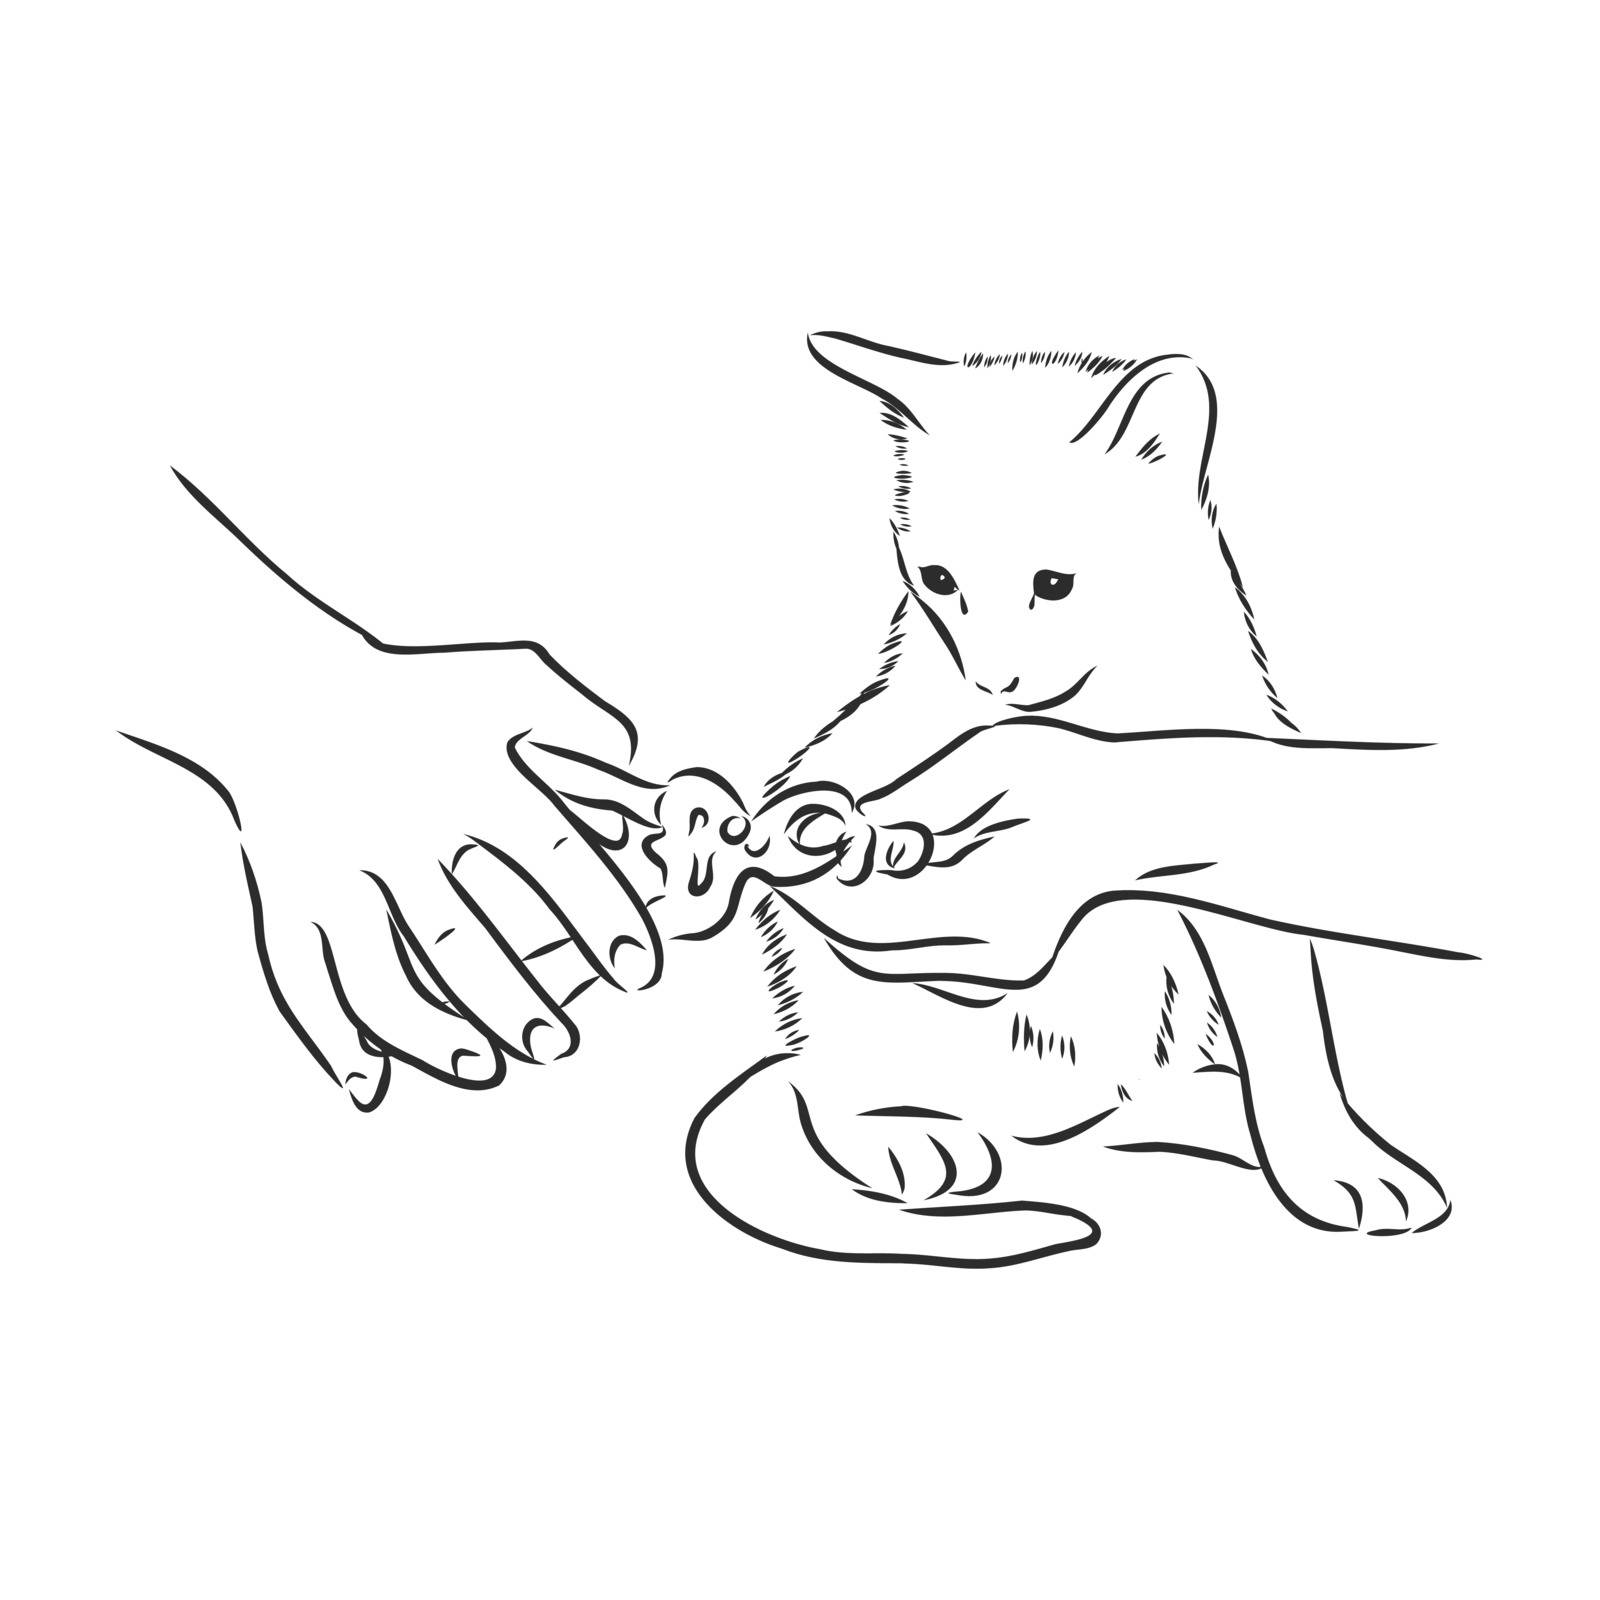 cat claw trimming, vector sketch illustration